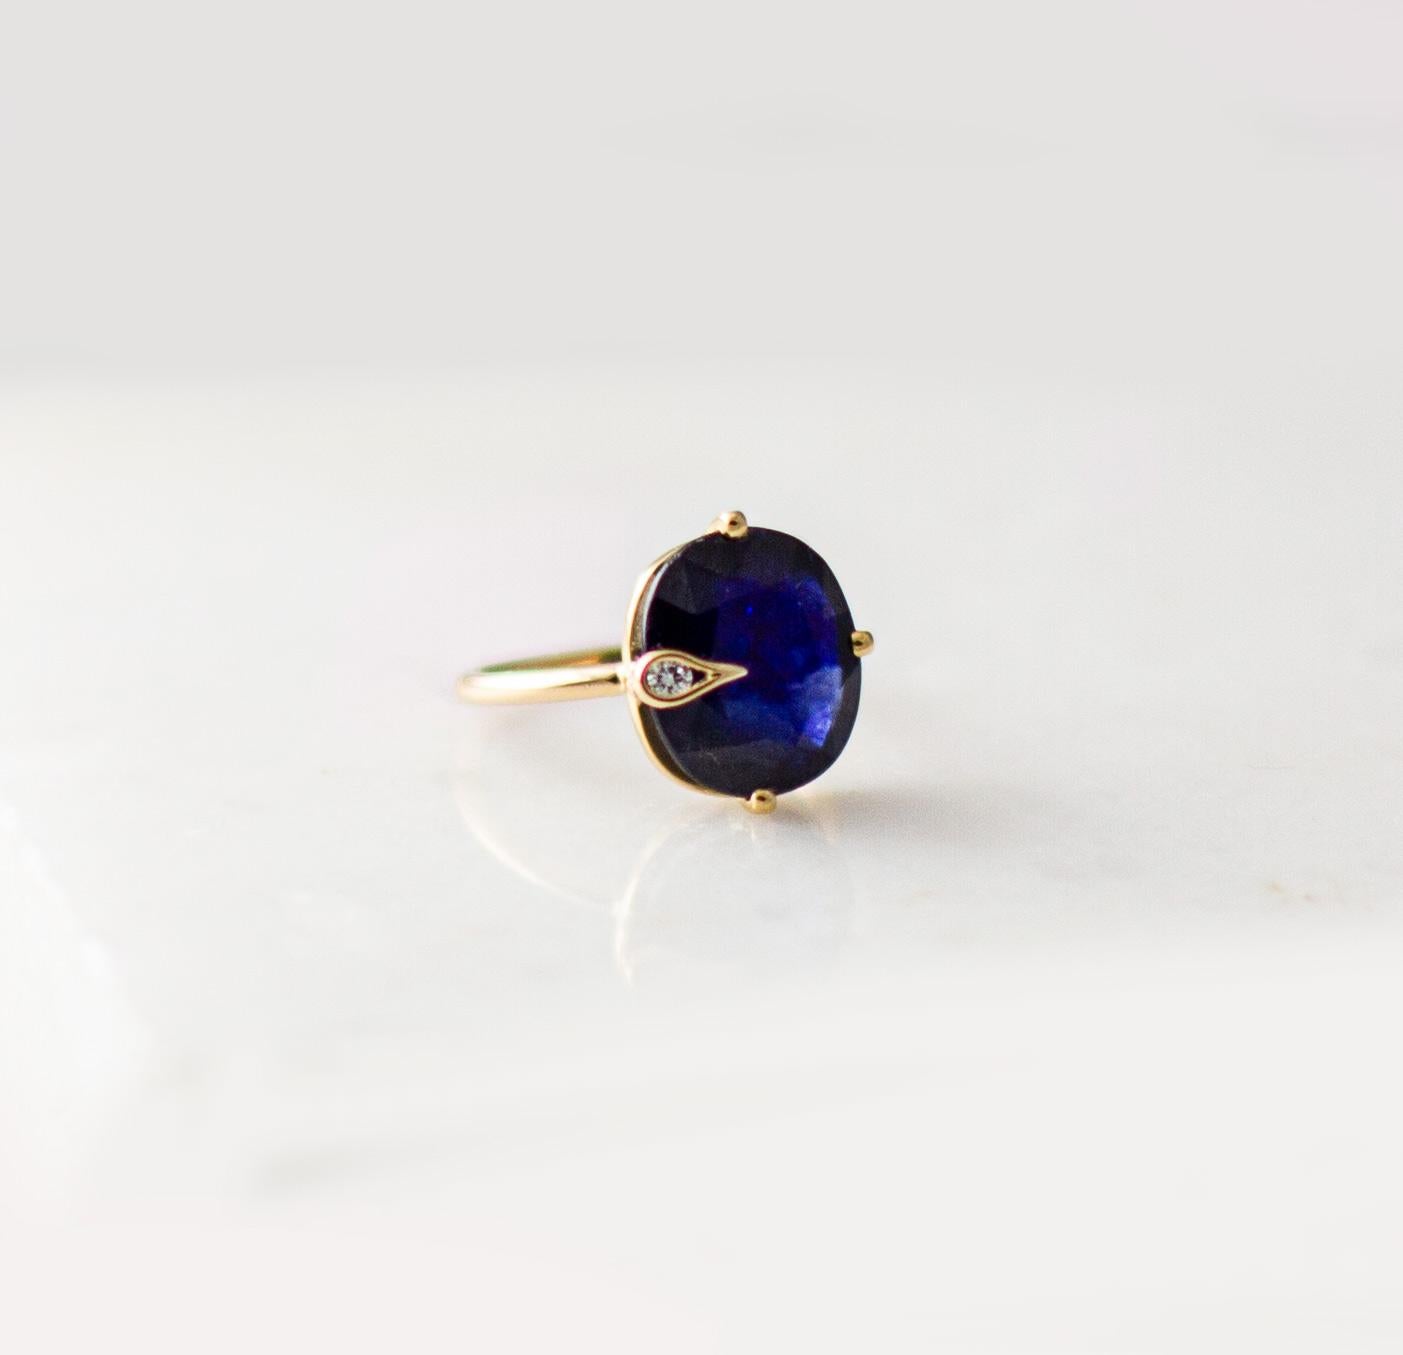 This contemporary Peacock ring features a cushion-cut blue sapphire weighing 4.17 carats and diamond accents, set in 18 karat yellow gold. The ring is comfortable to wear, and the gemstone is sure to catch the attention of anyone who sees it.

We